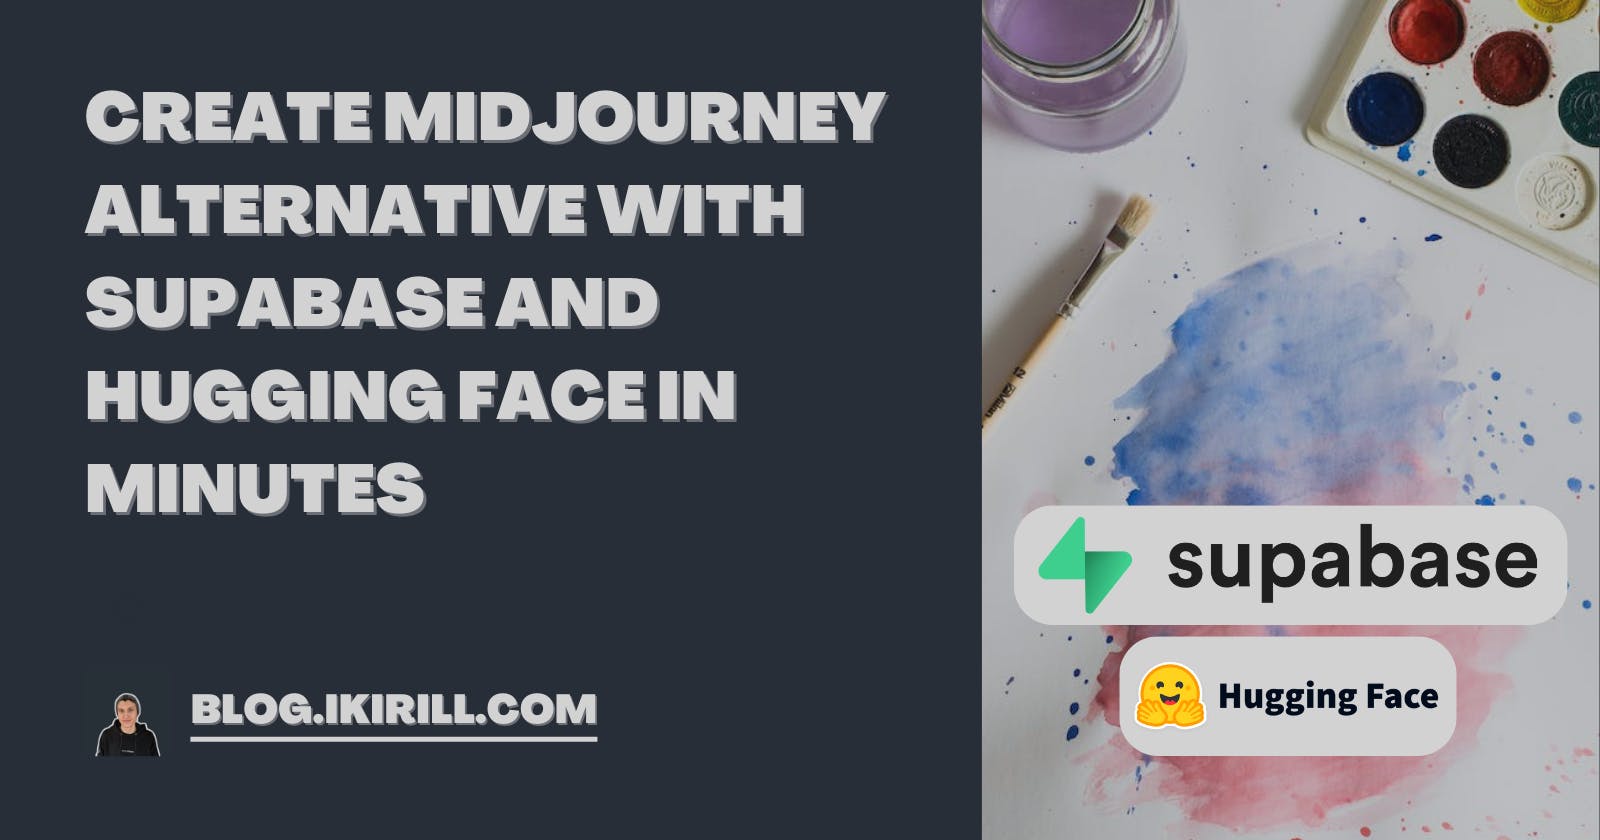 Create Midjourney Alternative with Supabase and Hugging Face in Minutes